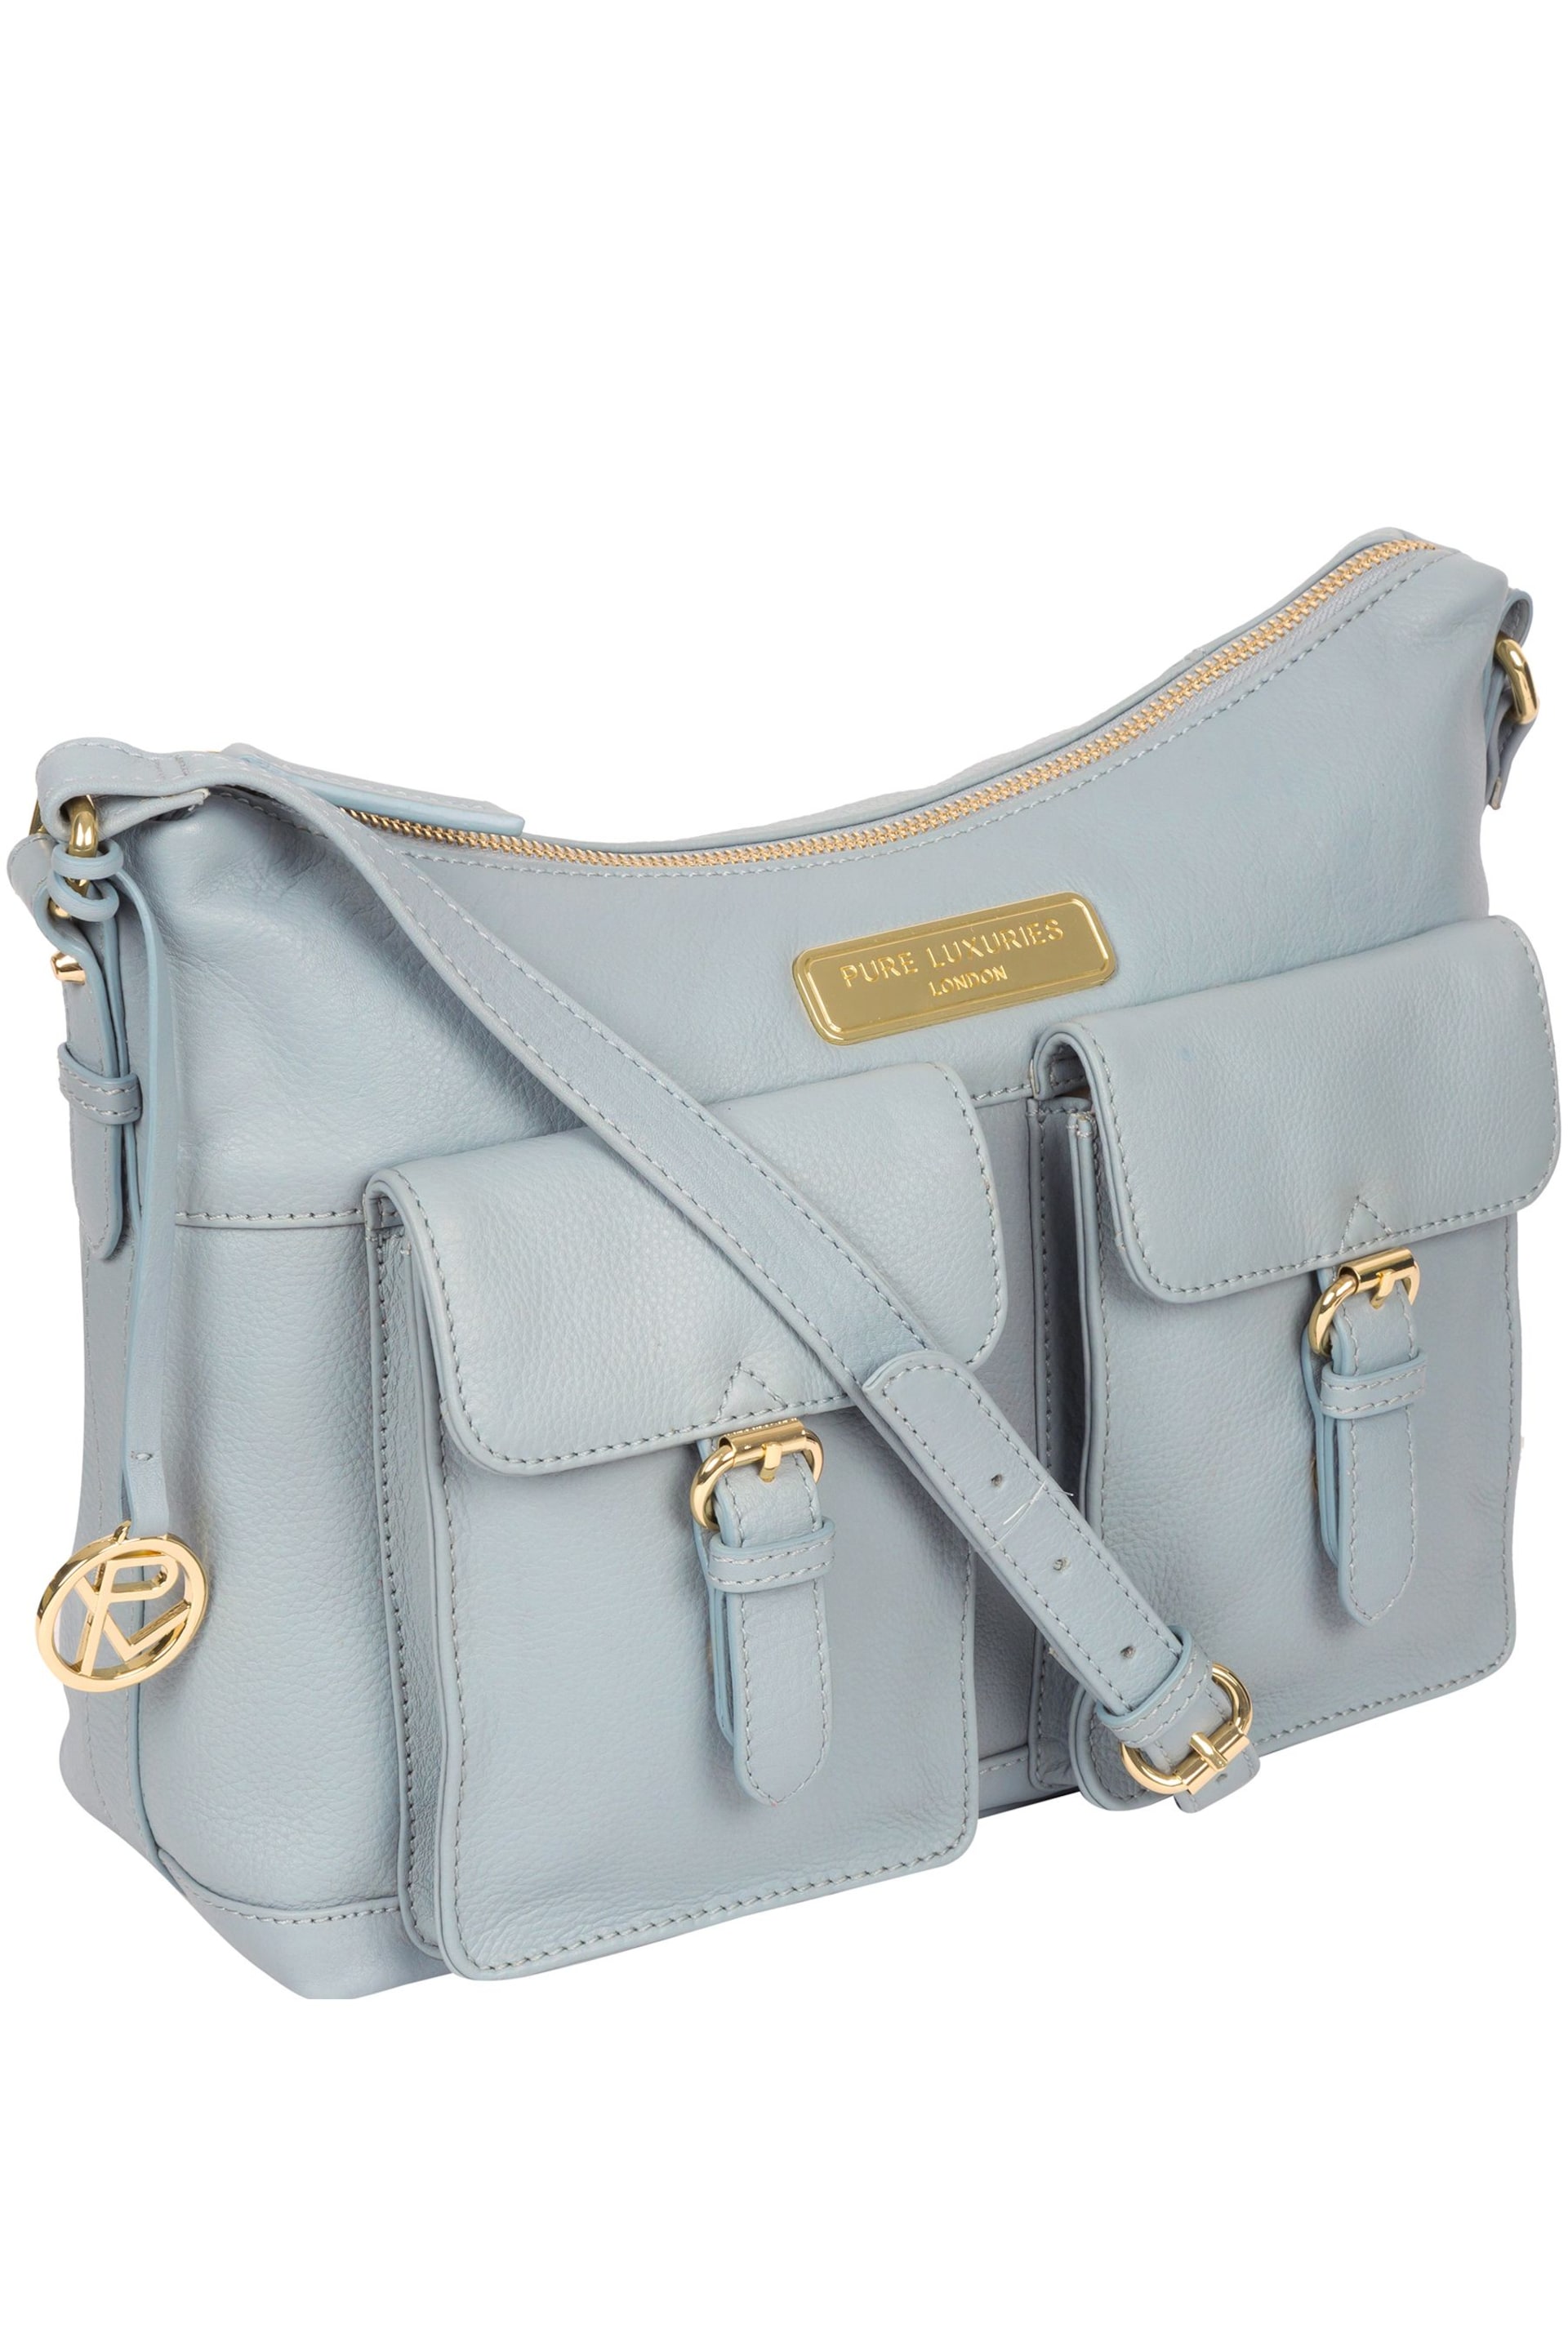 Pure Luxuries London Jenna Leather Shoulder Bag - Image 3 of 6